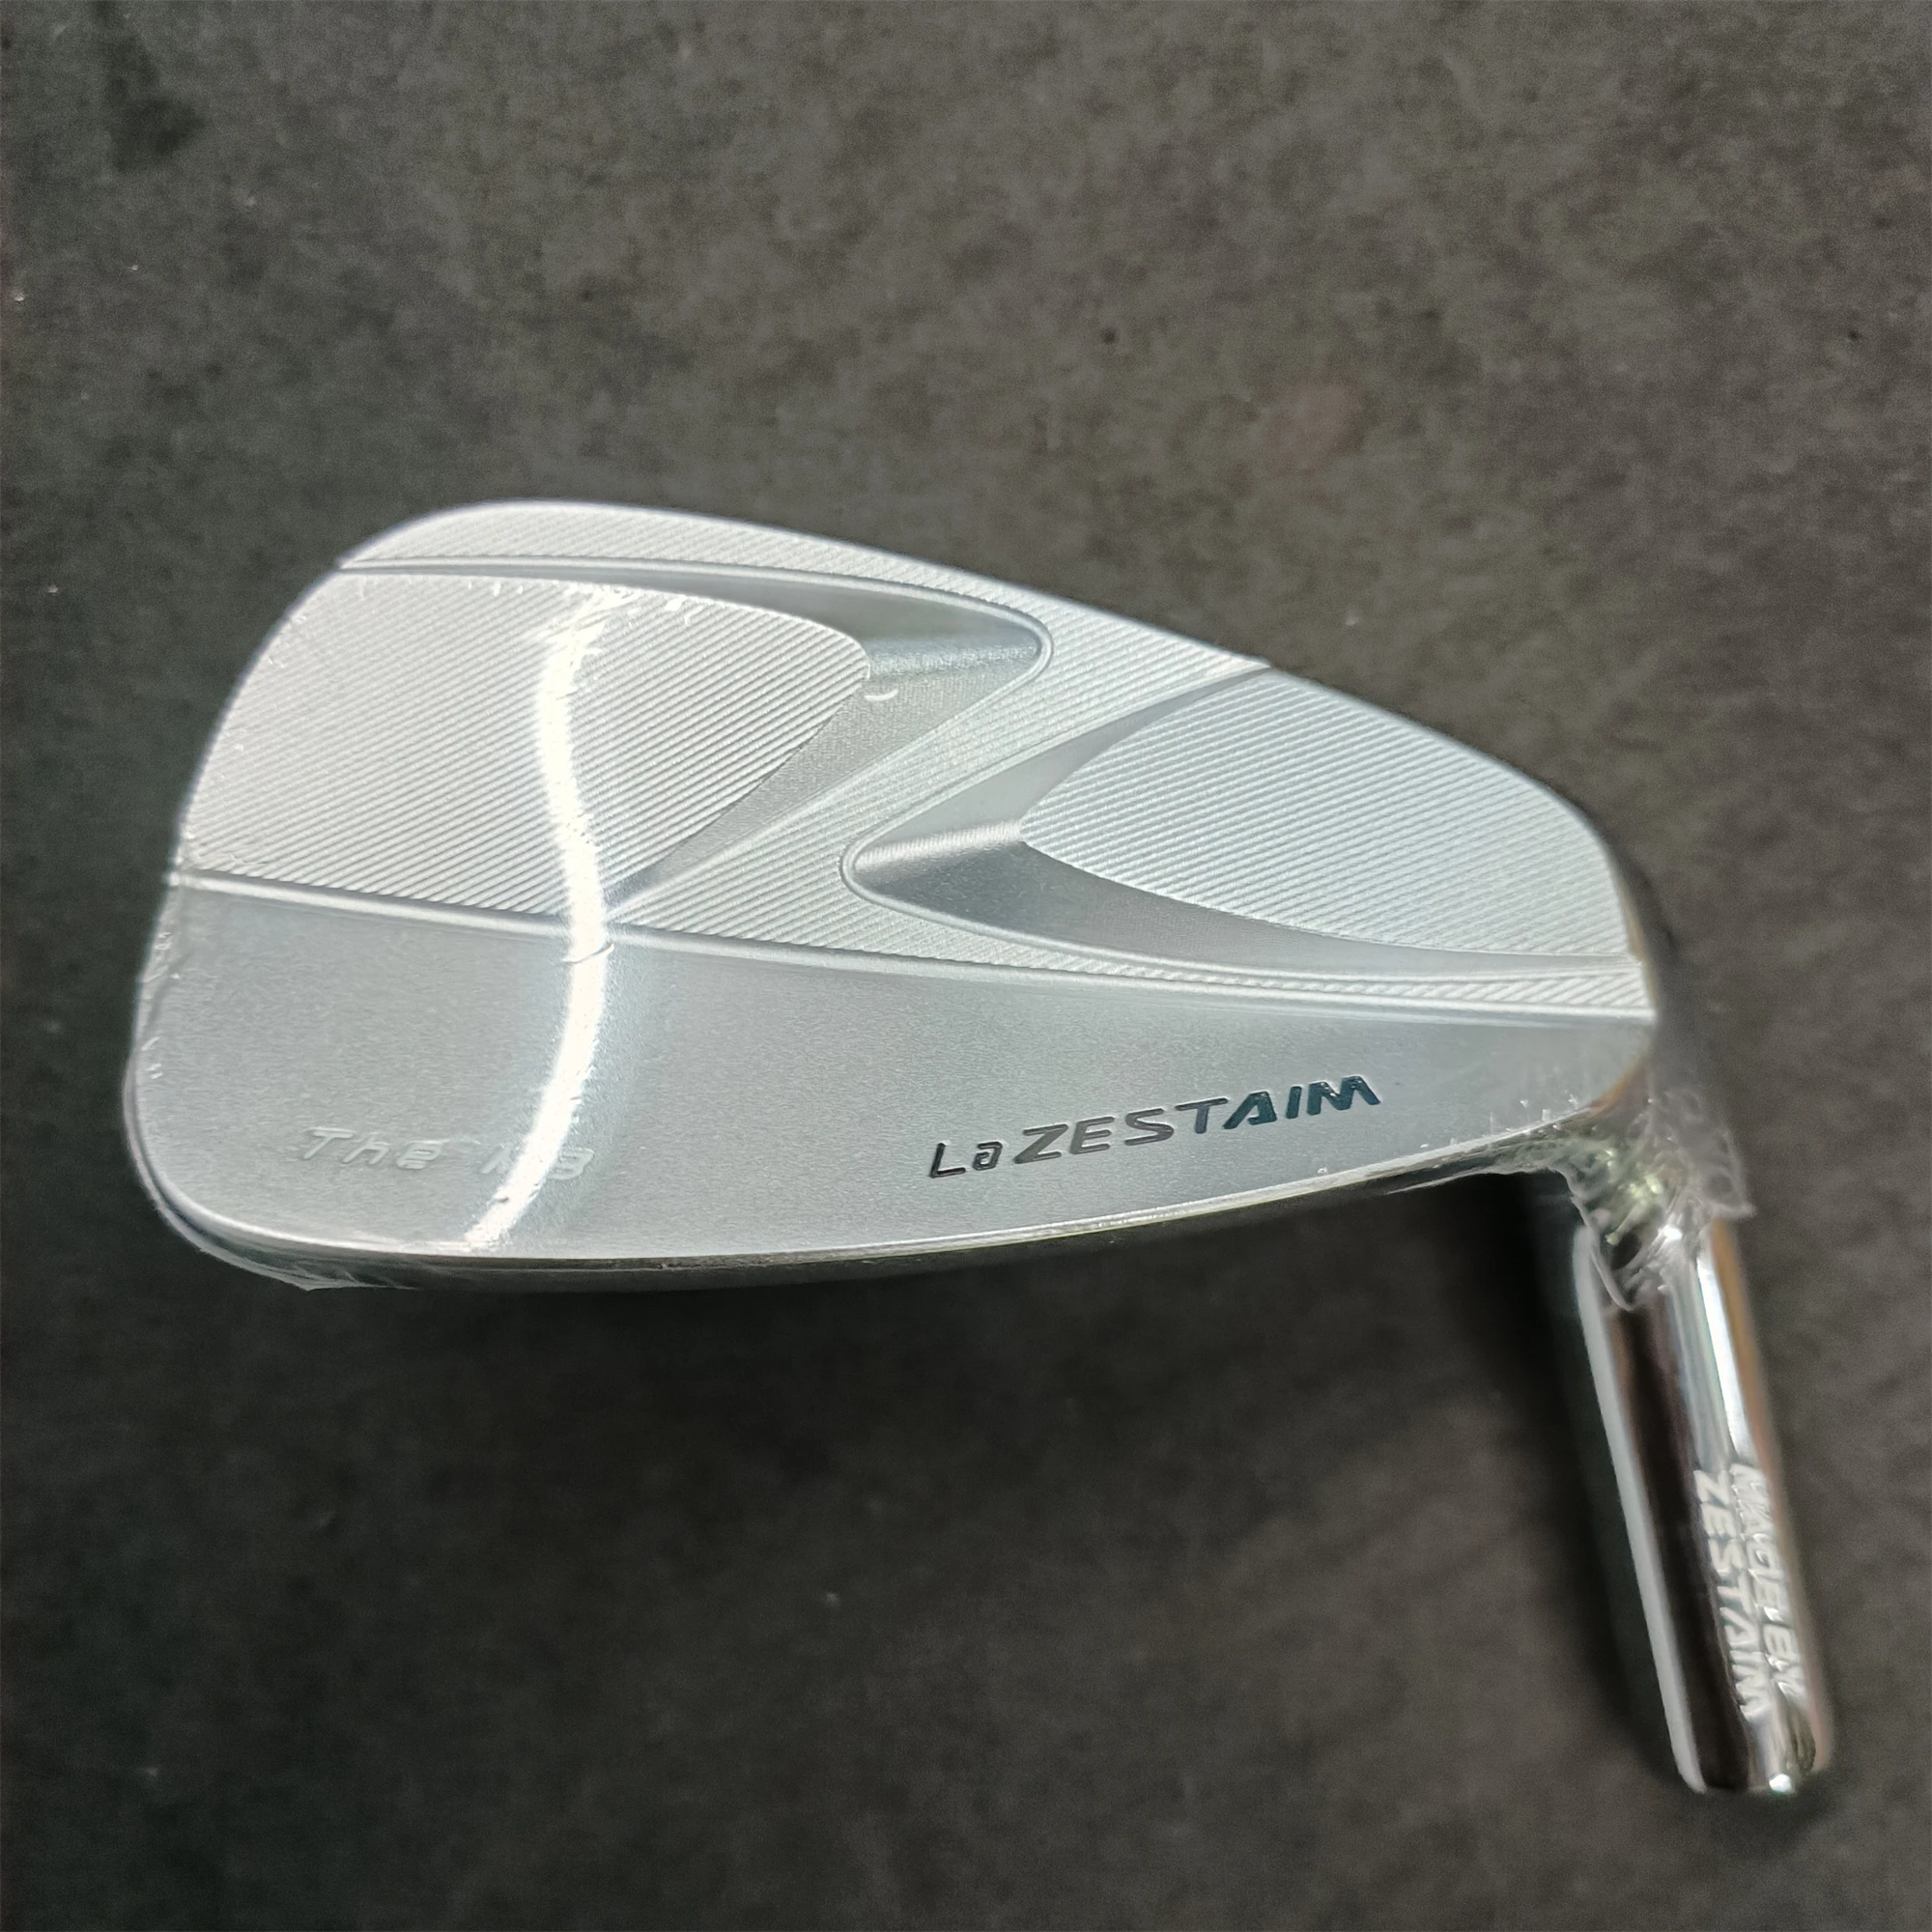 

LAZESTAIM-CB Iron Set Golf Clubs, CNC Machining, Original High Quality with Regular Steel Shaft Ferrules and Grips are optional